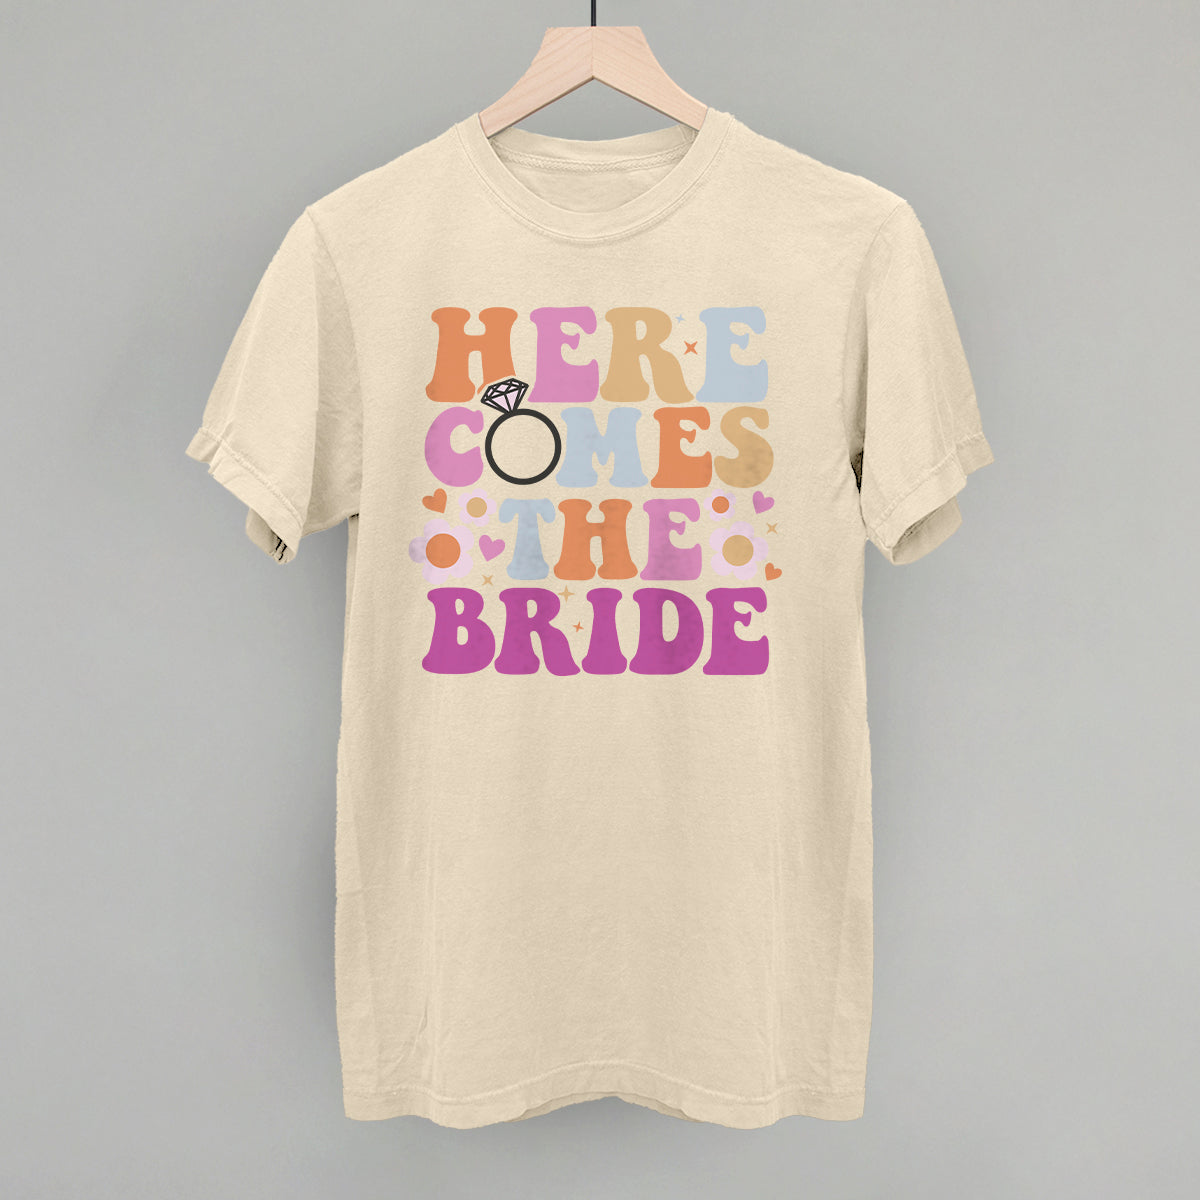 Here Comes the Bride (Groovy)